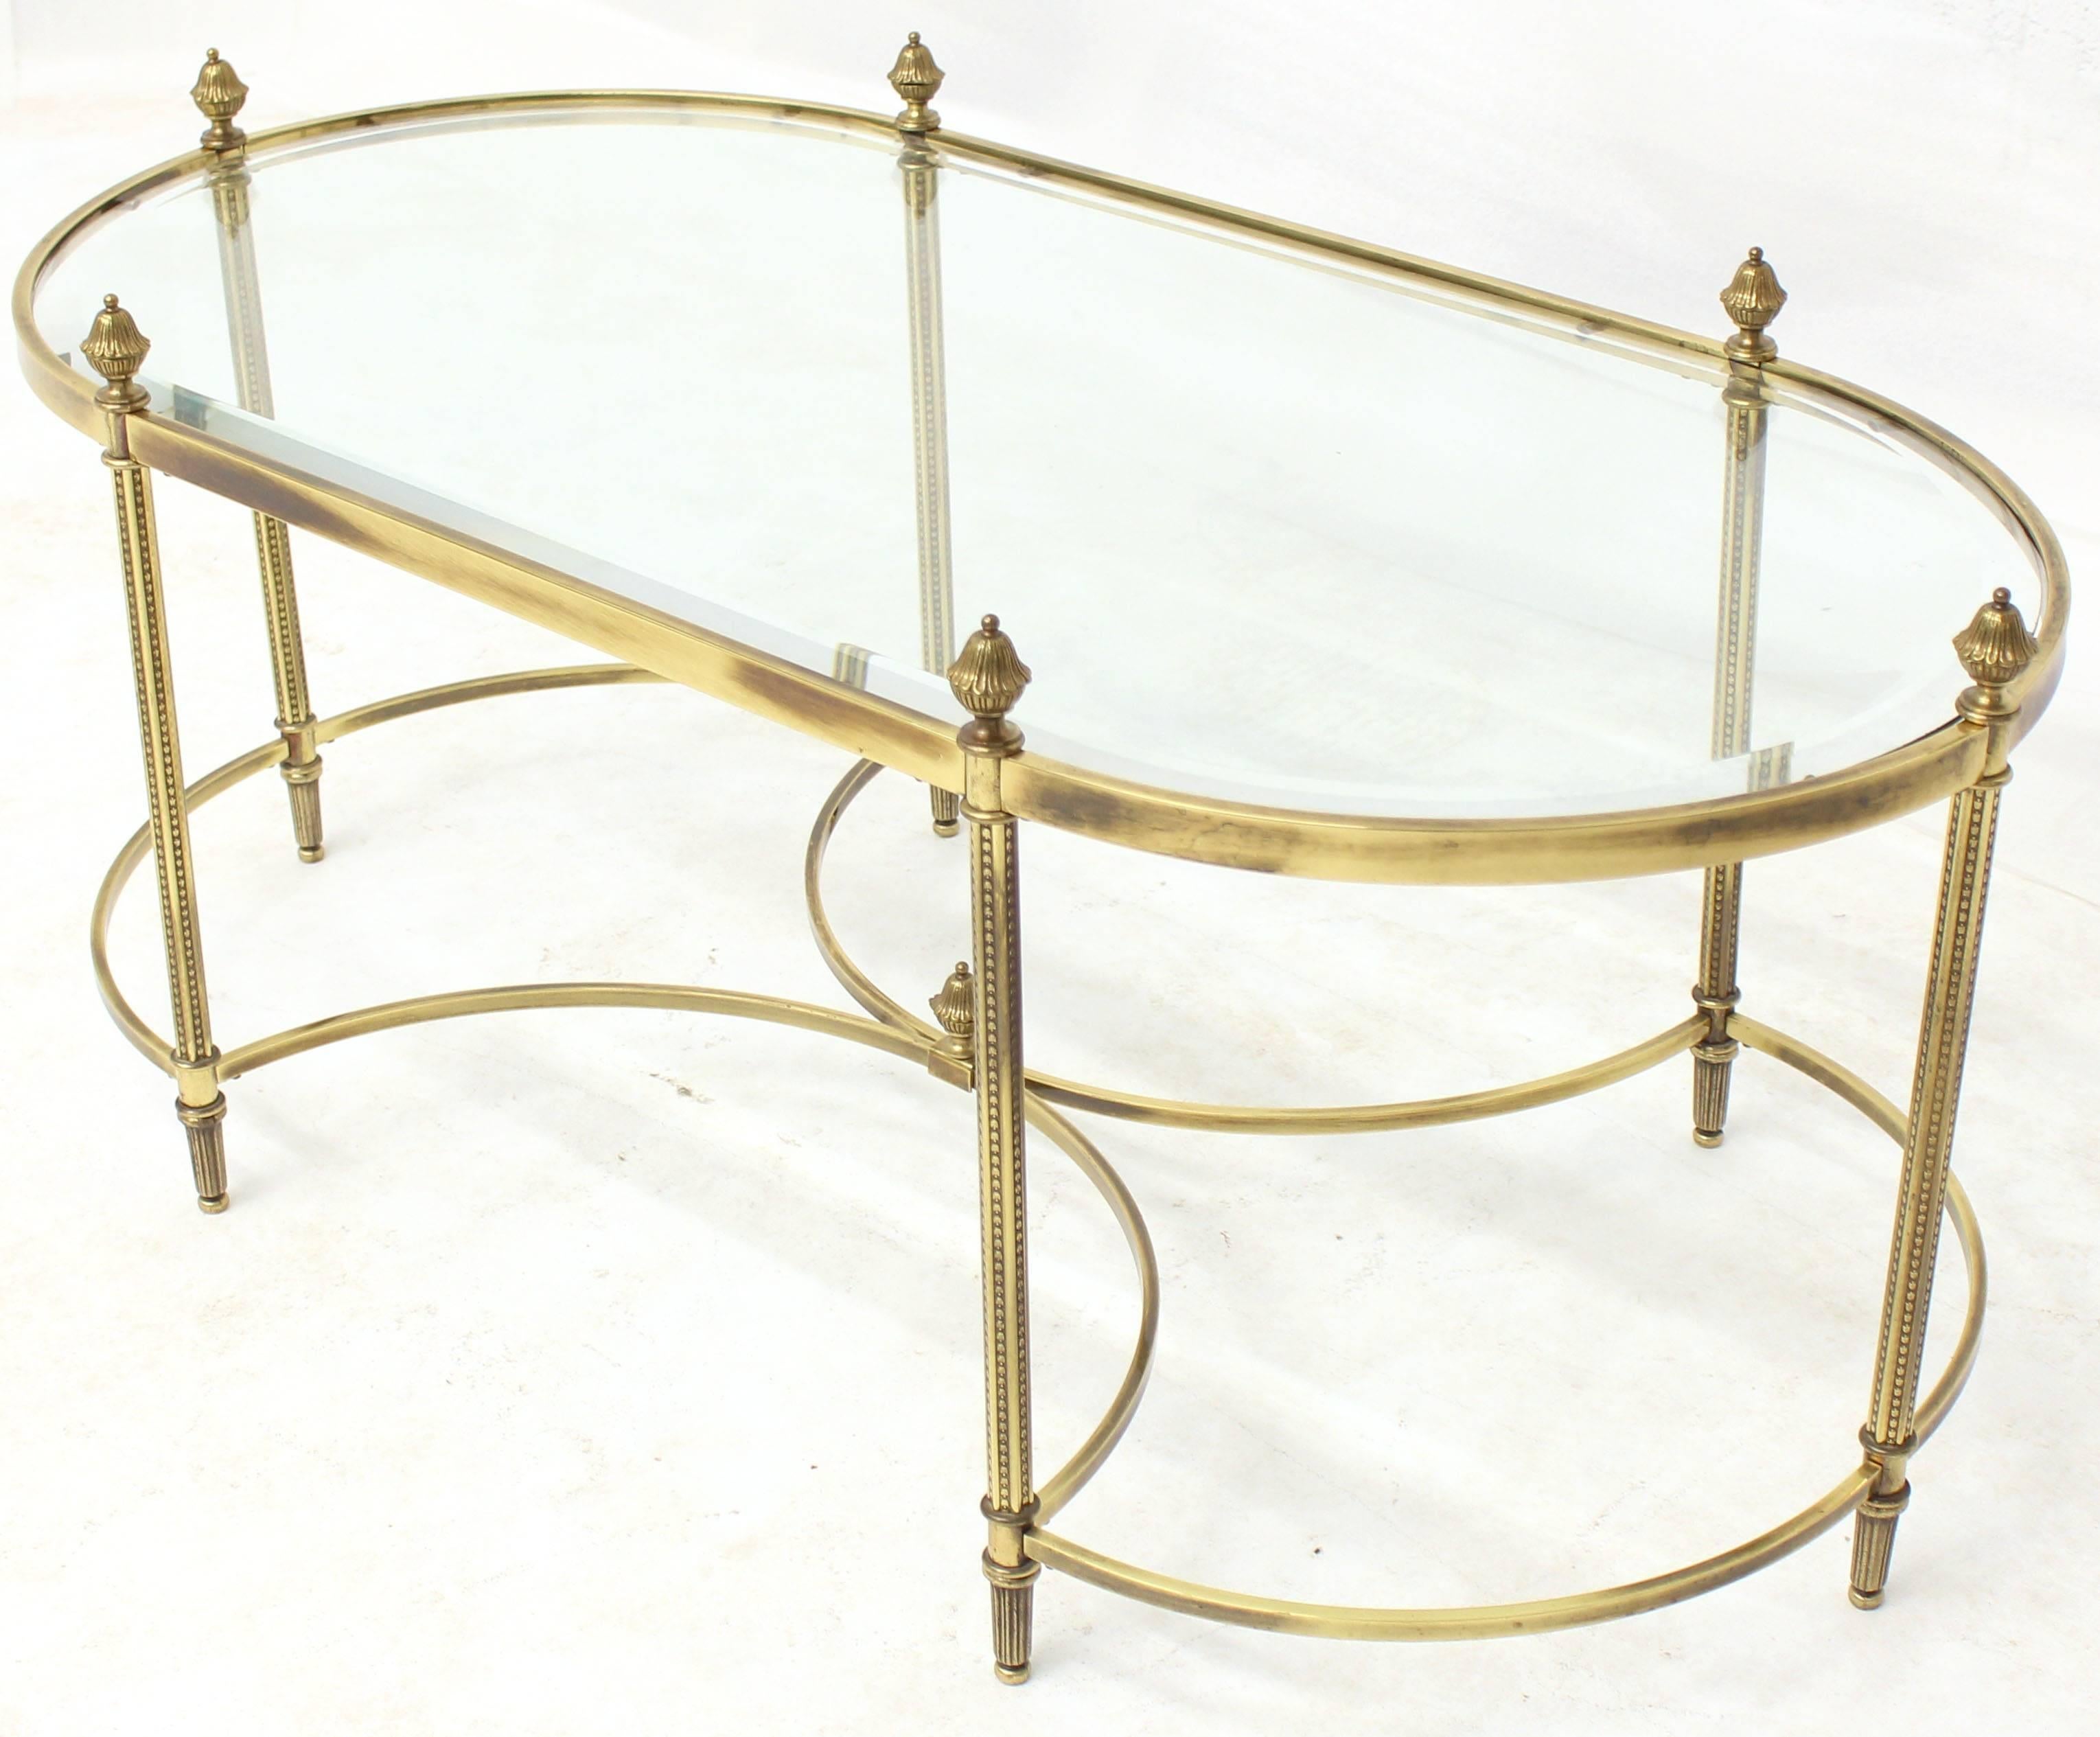 Decorative elegant design brass and glass coffee table from circa 1970s.